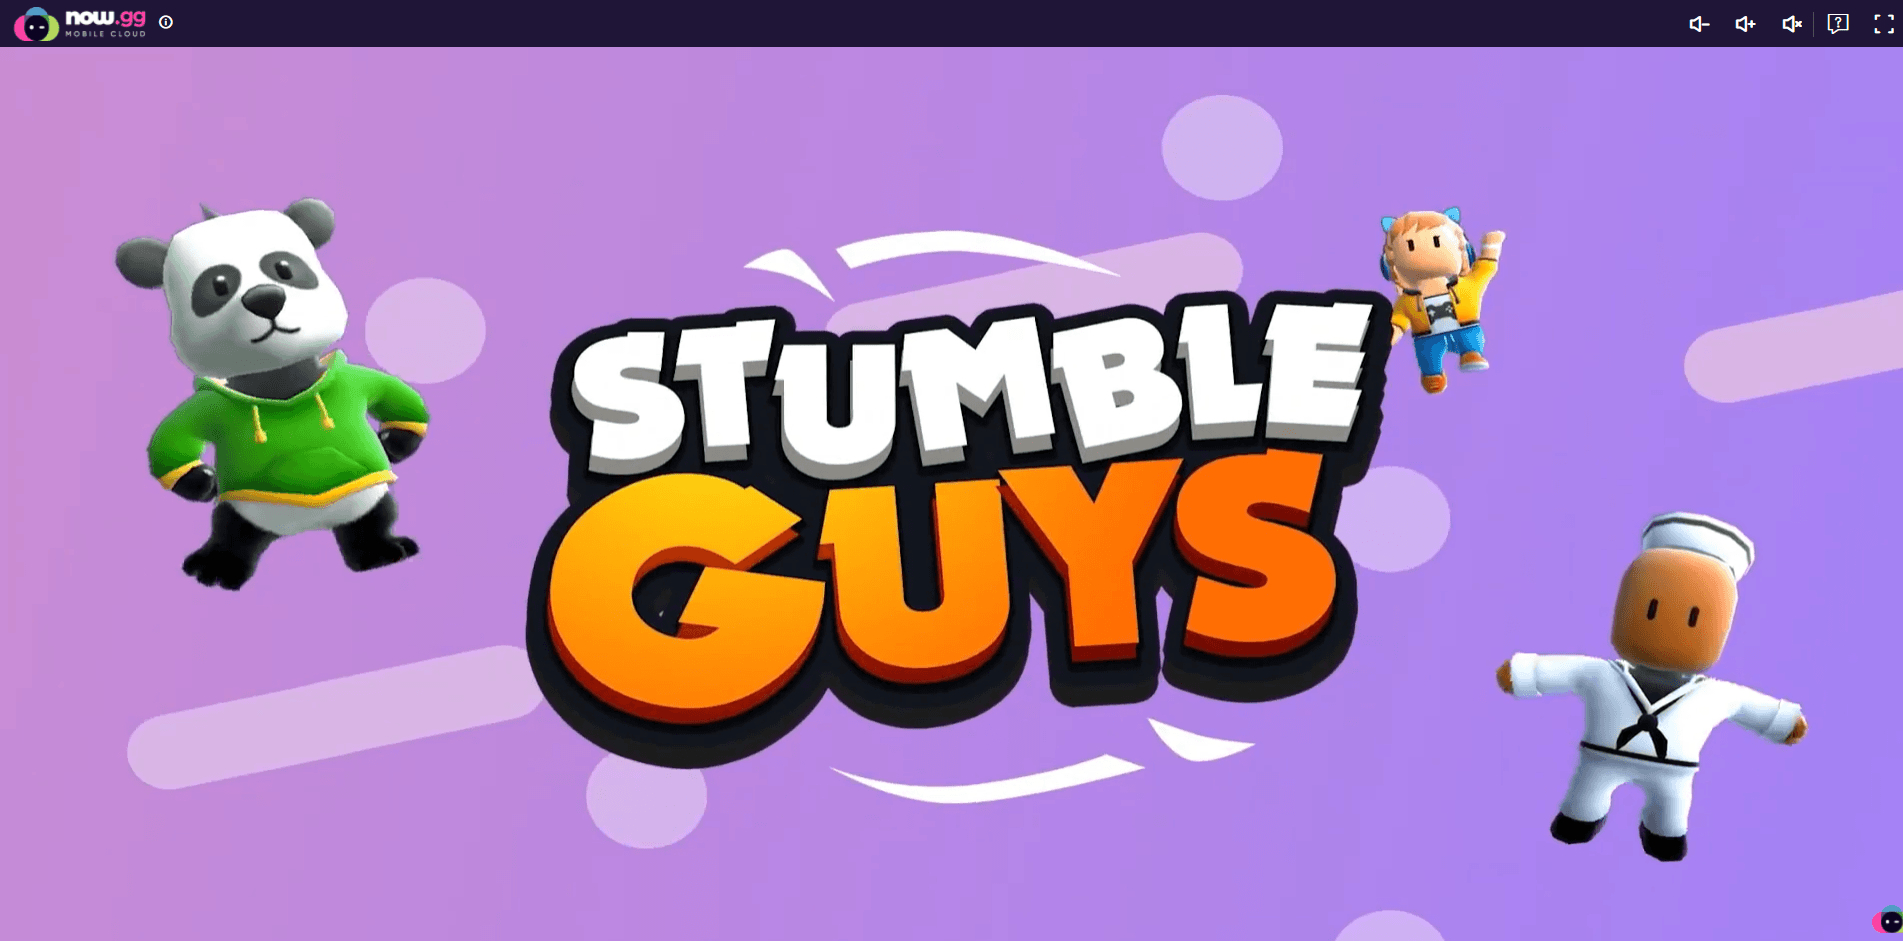 How to improve the performance of Stumble Guys